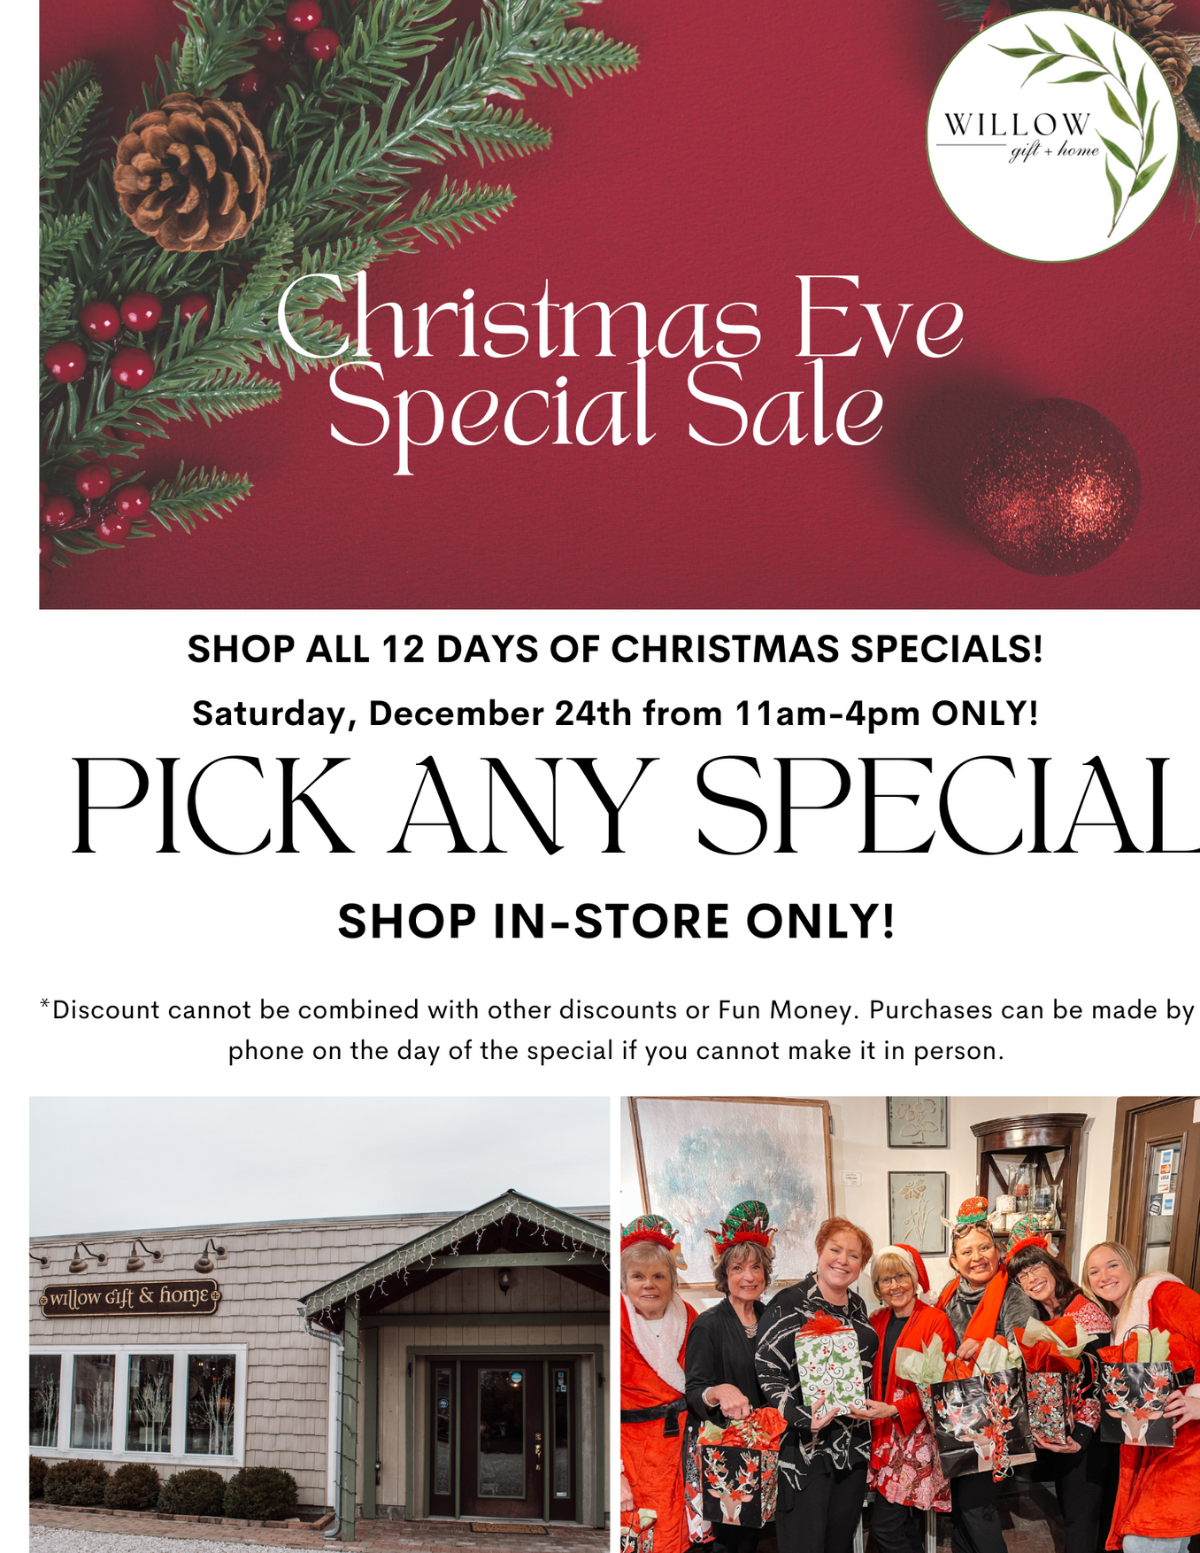 Pick any special from the 12 Days of Christmas - in store only